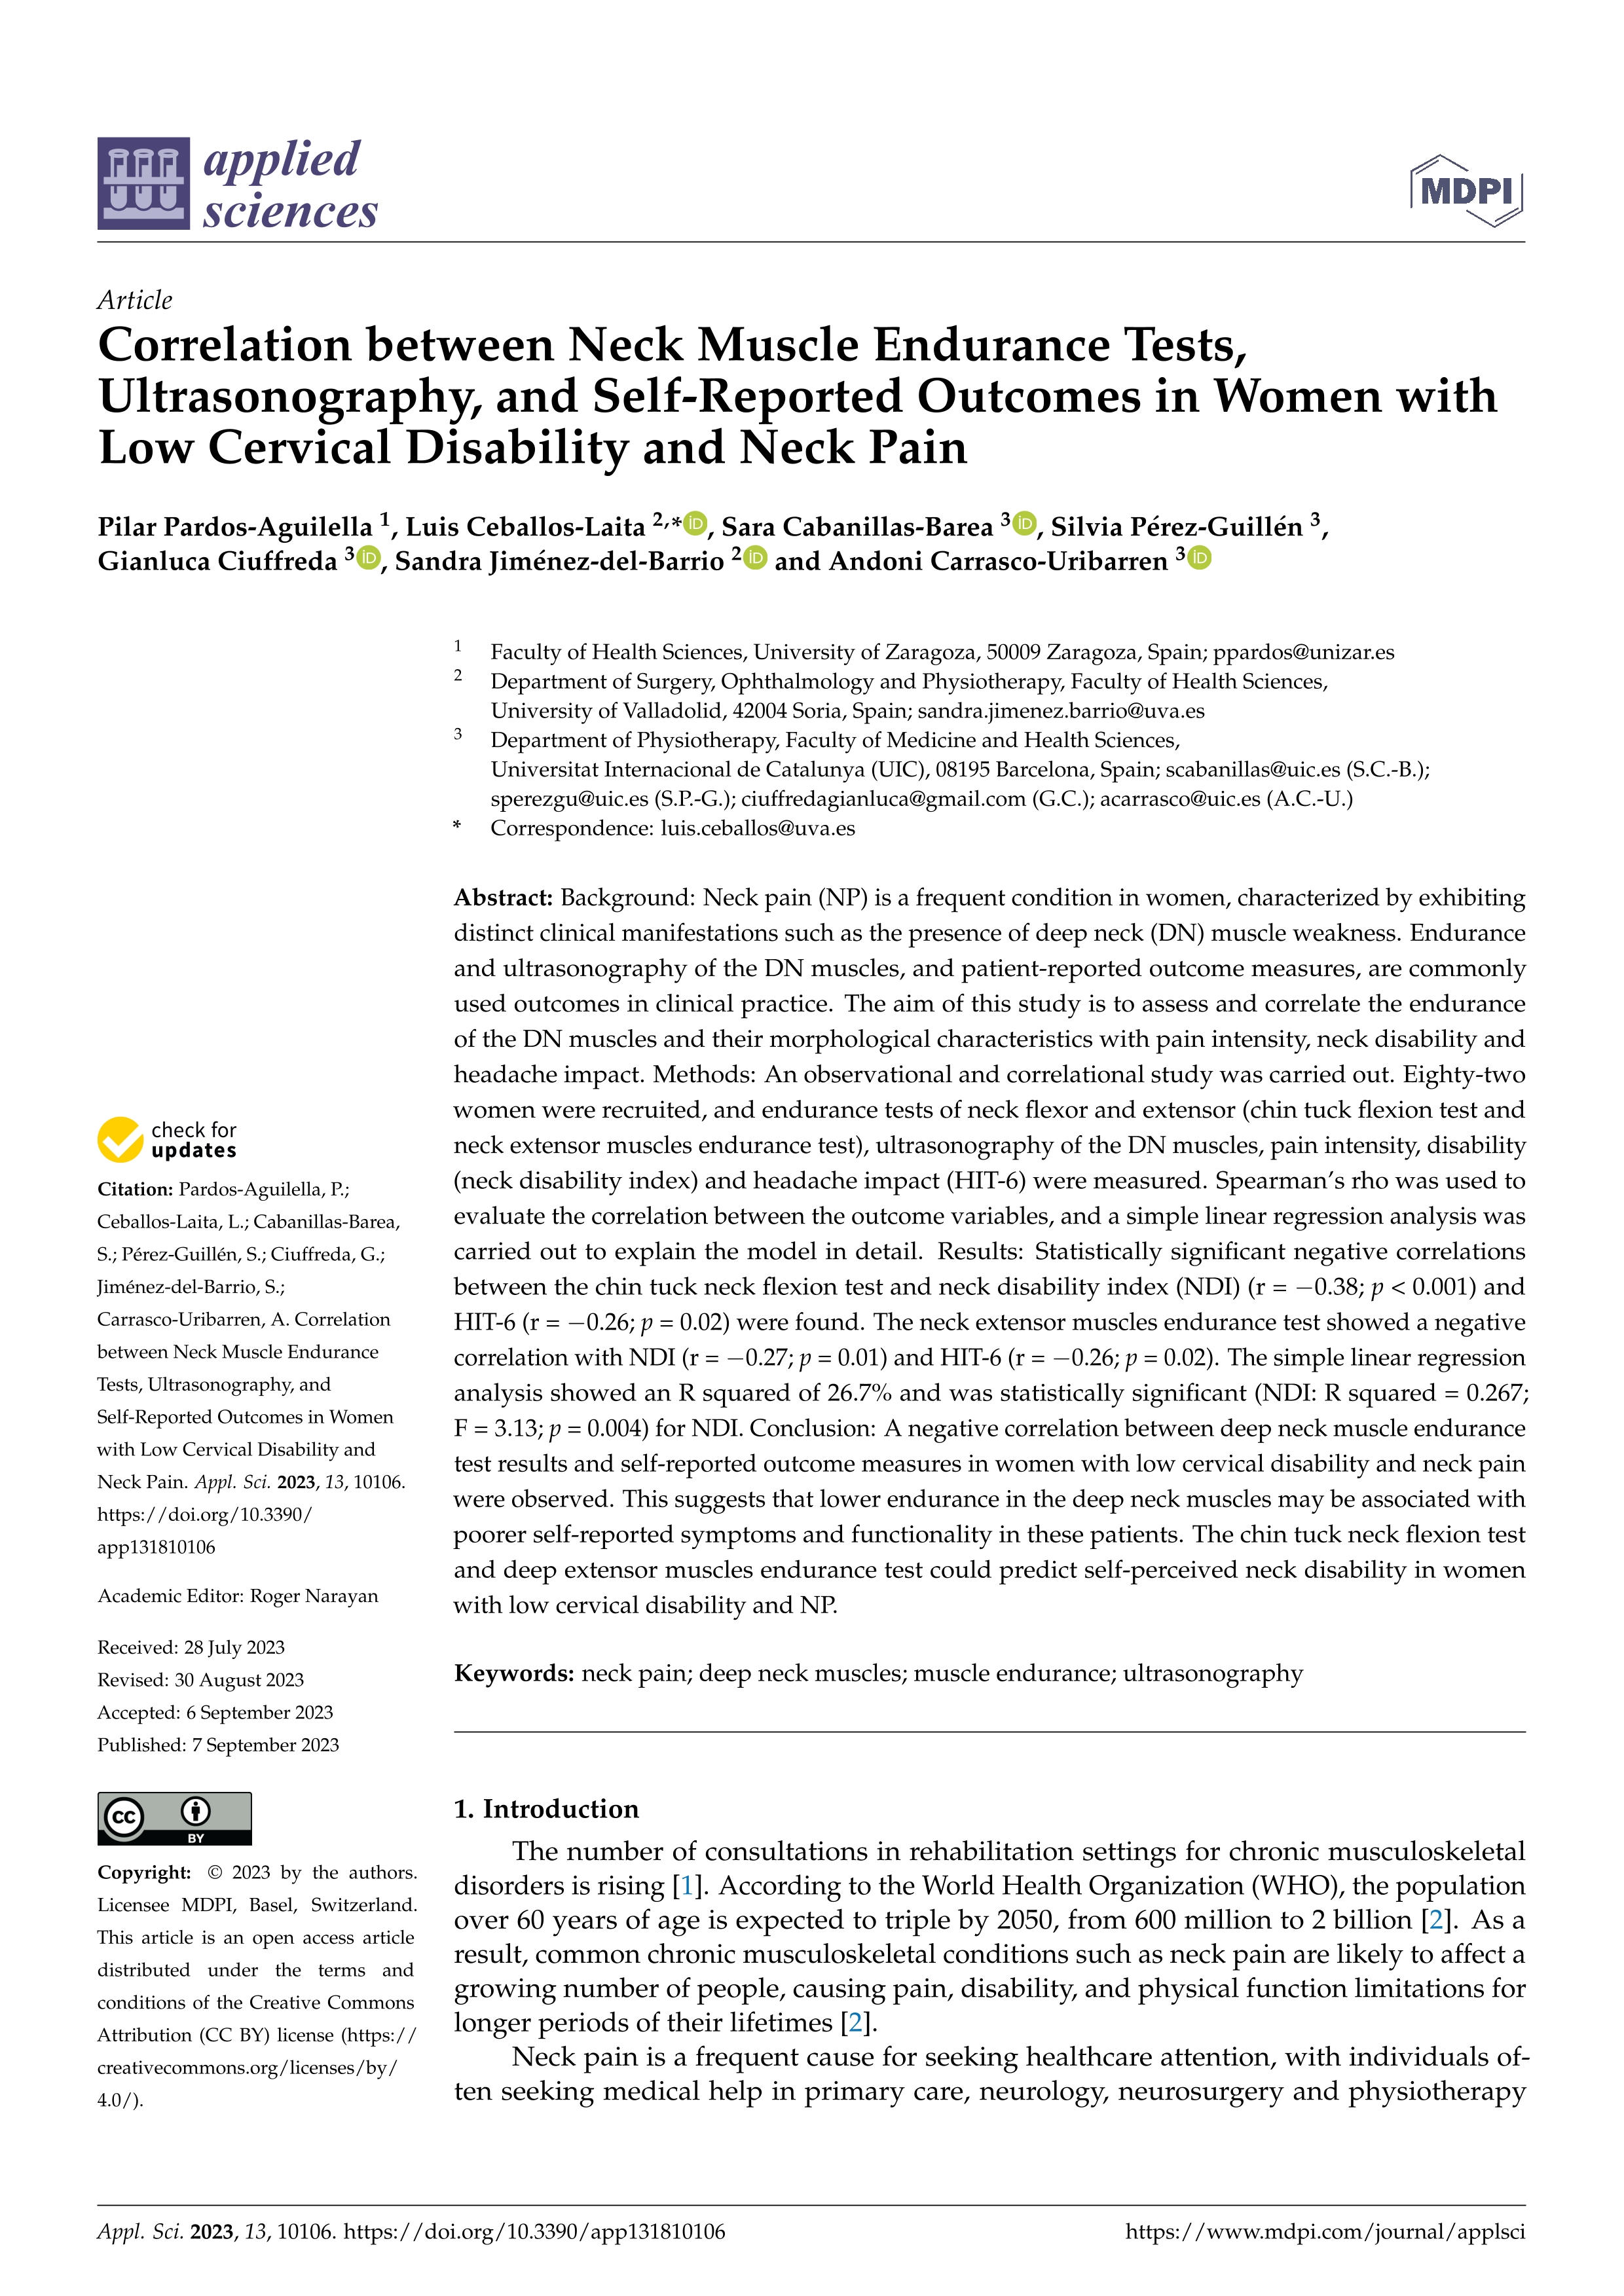 Correlation between neck muscle endurance tests, ultrasonography, and self-reported outcomes in women with low cervical disability and neck pain